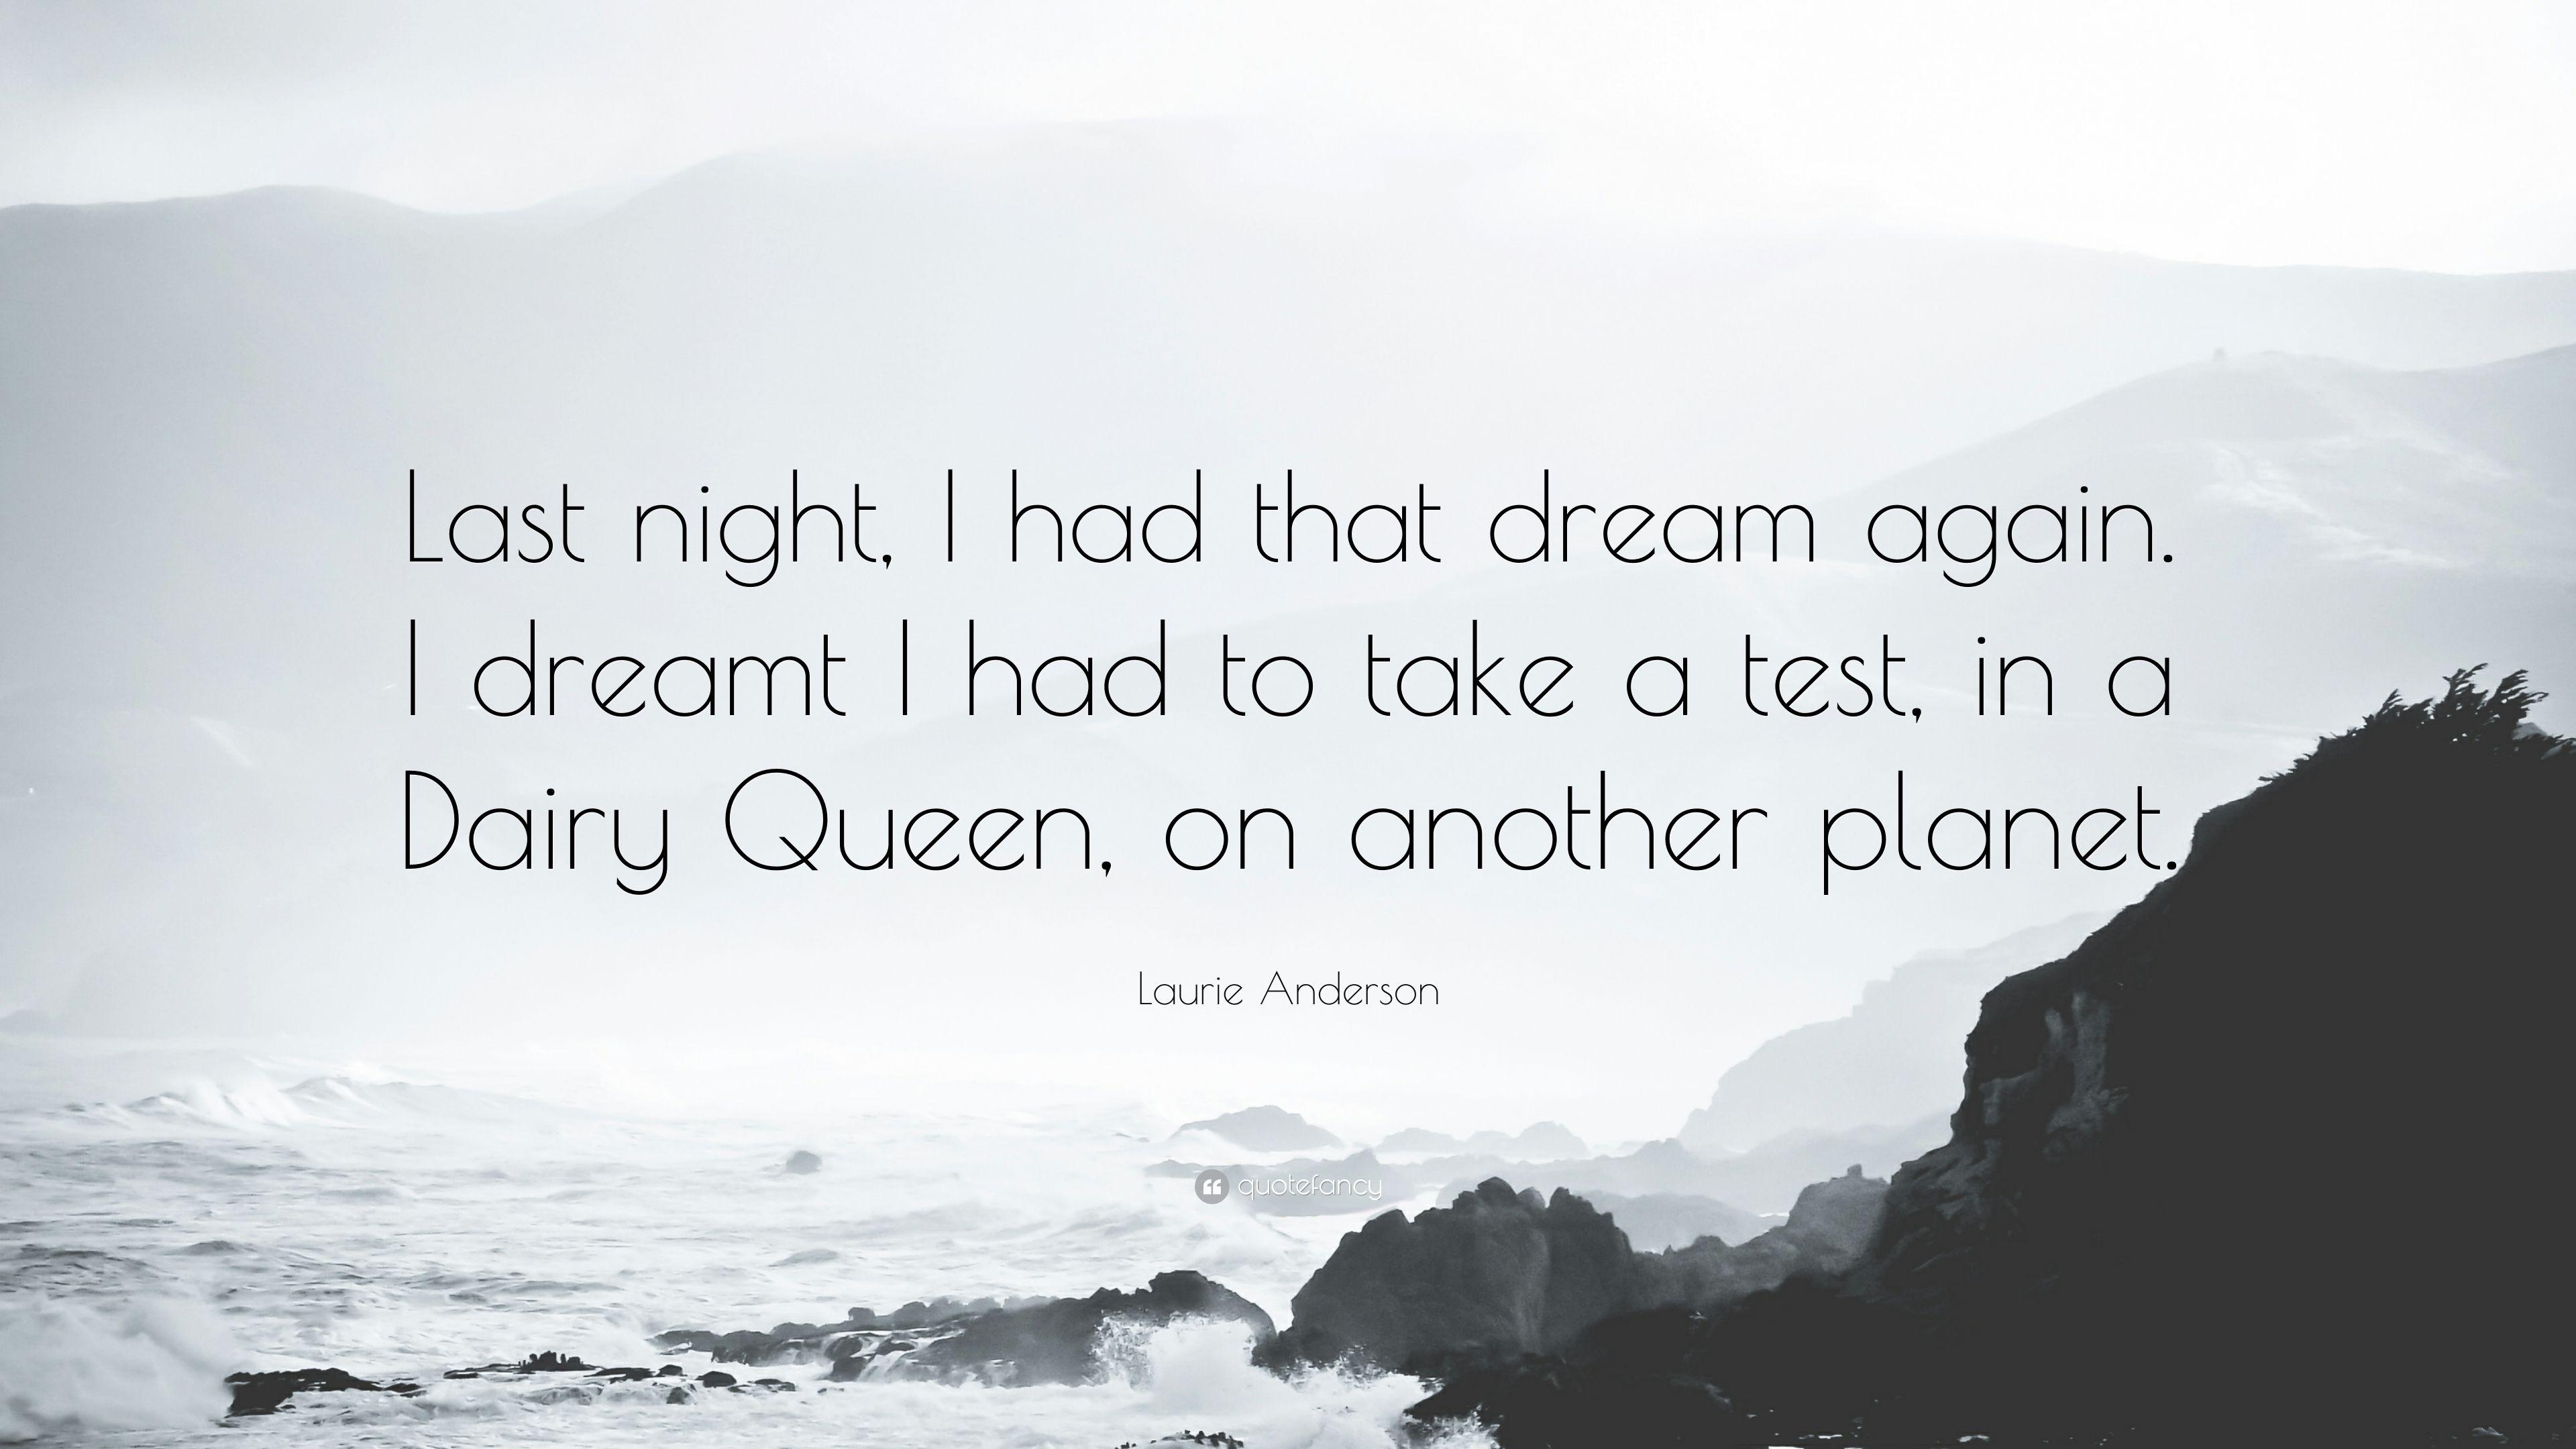 Laurie Anderson Quote: “Last night, I had that dream again. I